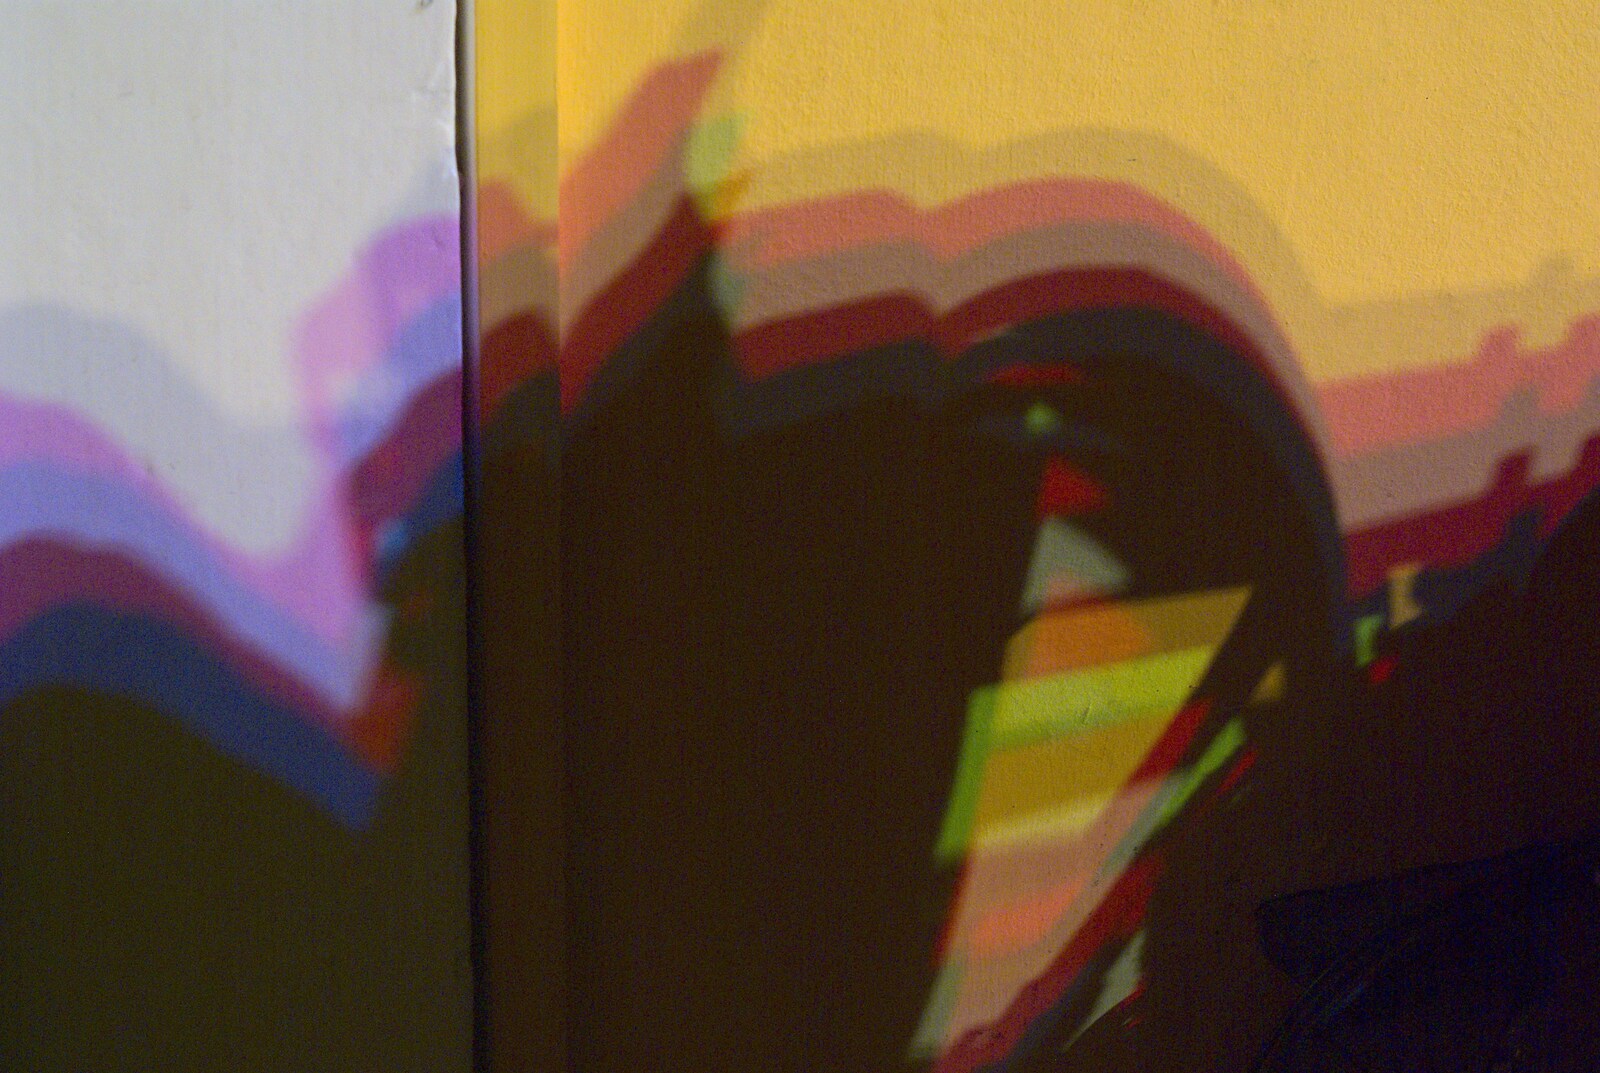 A cool pattern from coloured lights from The BBs with Ed Sheeran, Fred's Haircut, and East Lane, Diss, Ipswich and Bawdsey  - 21st February 2010